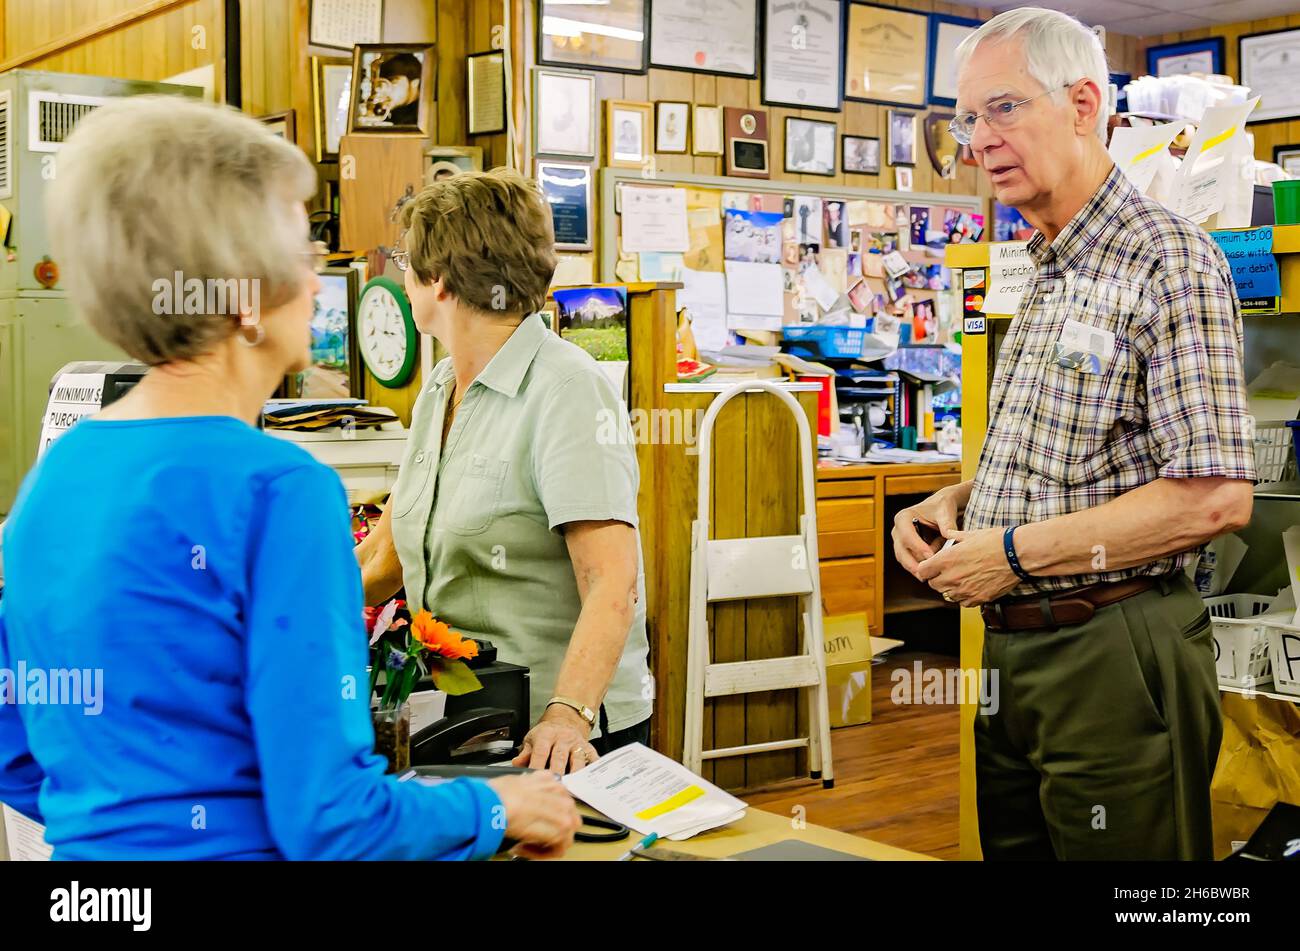 Pharmacist Robert Turnage talks with a customer at Turnage Drug Store in Water Valley, Mississippi. The family pharmacy was established in 1905. Stock Photo